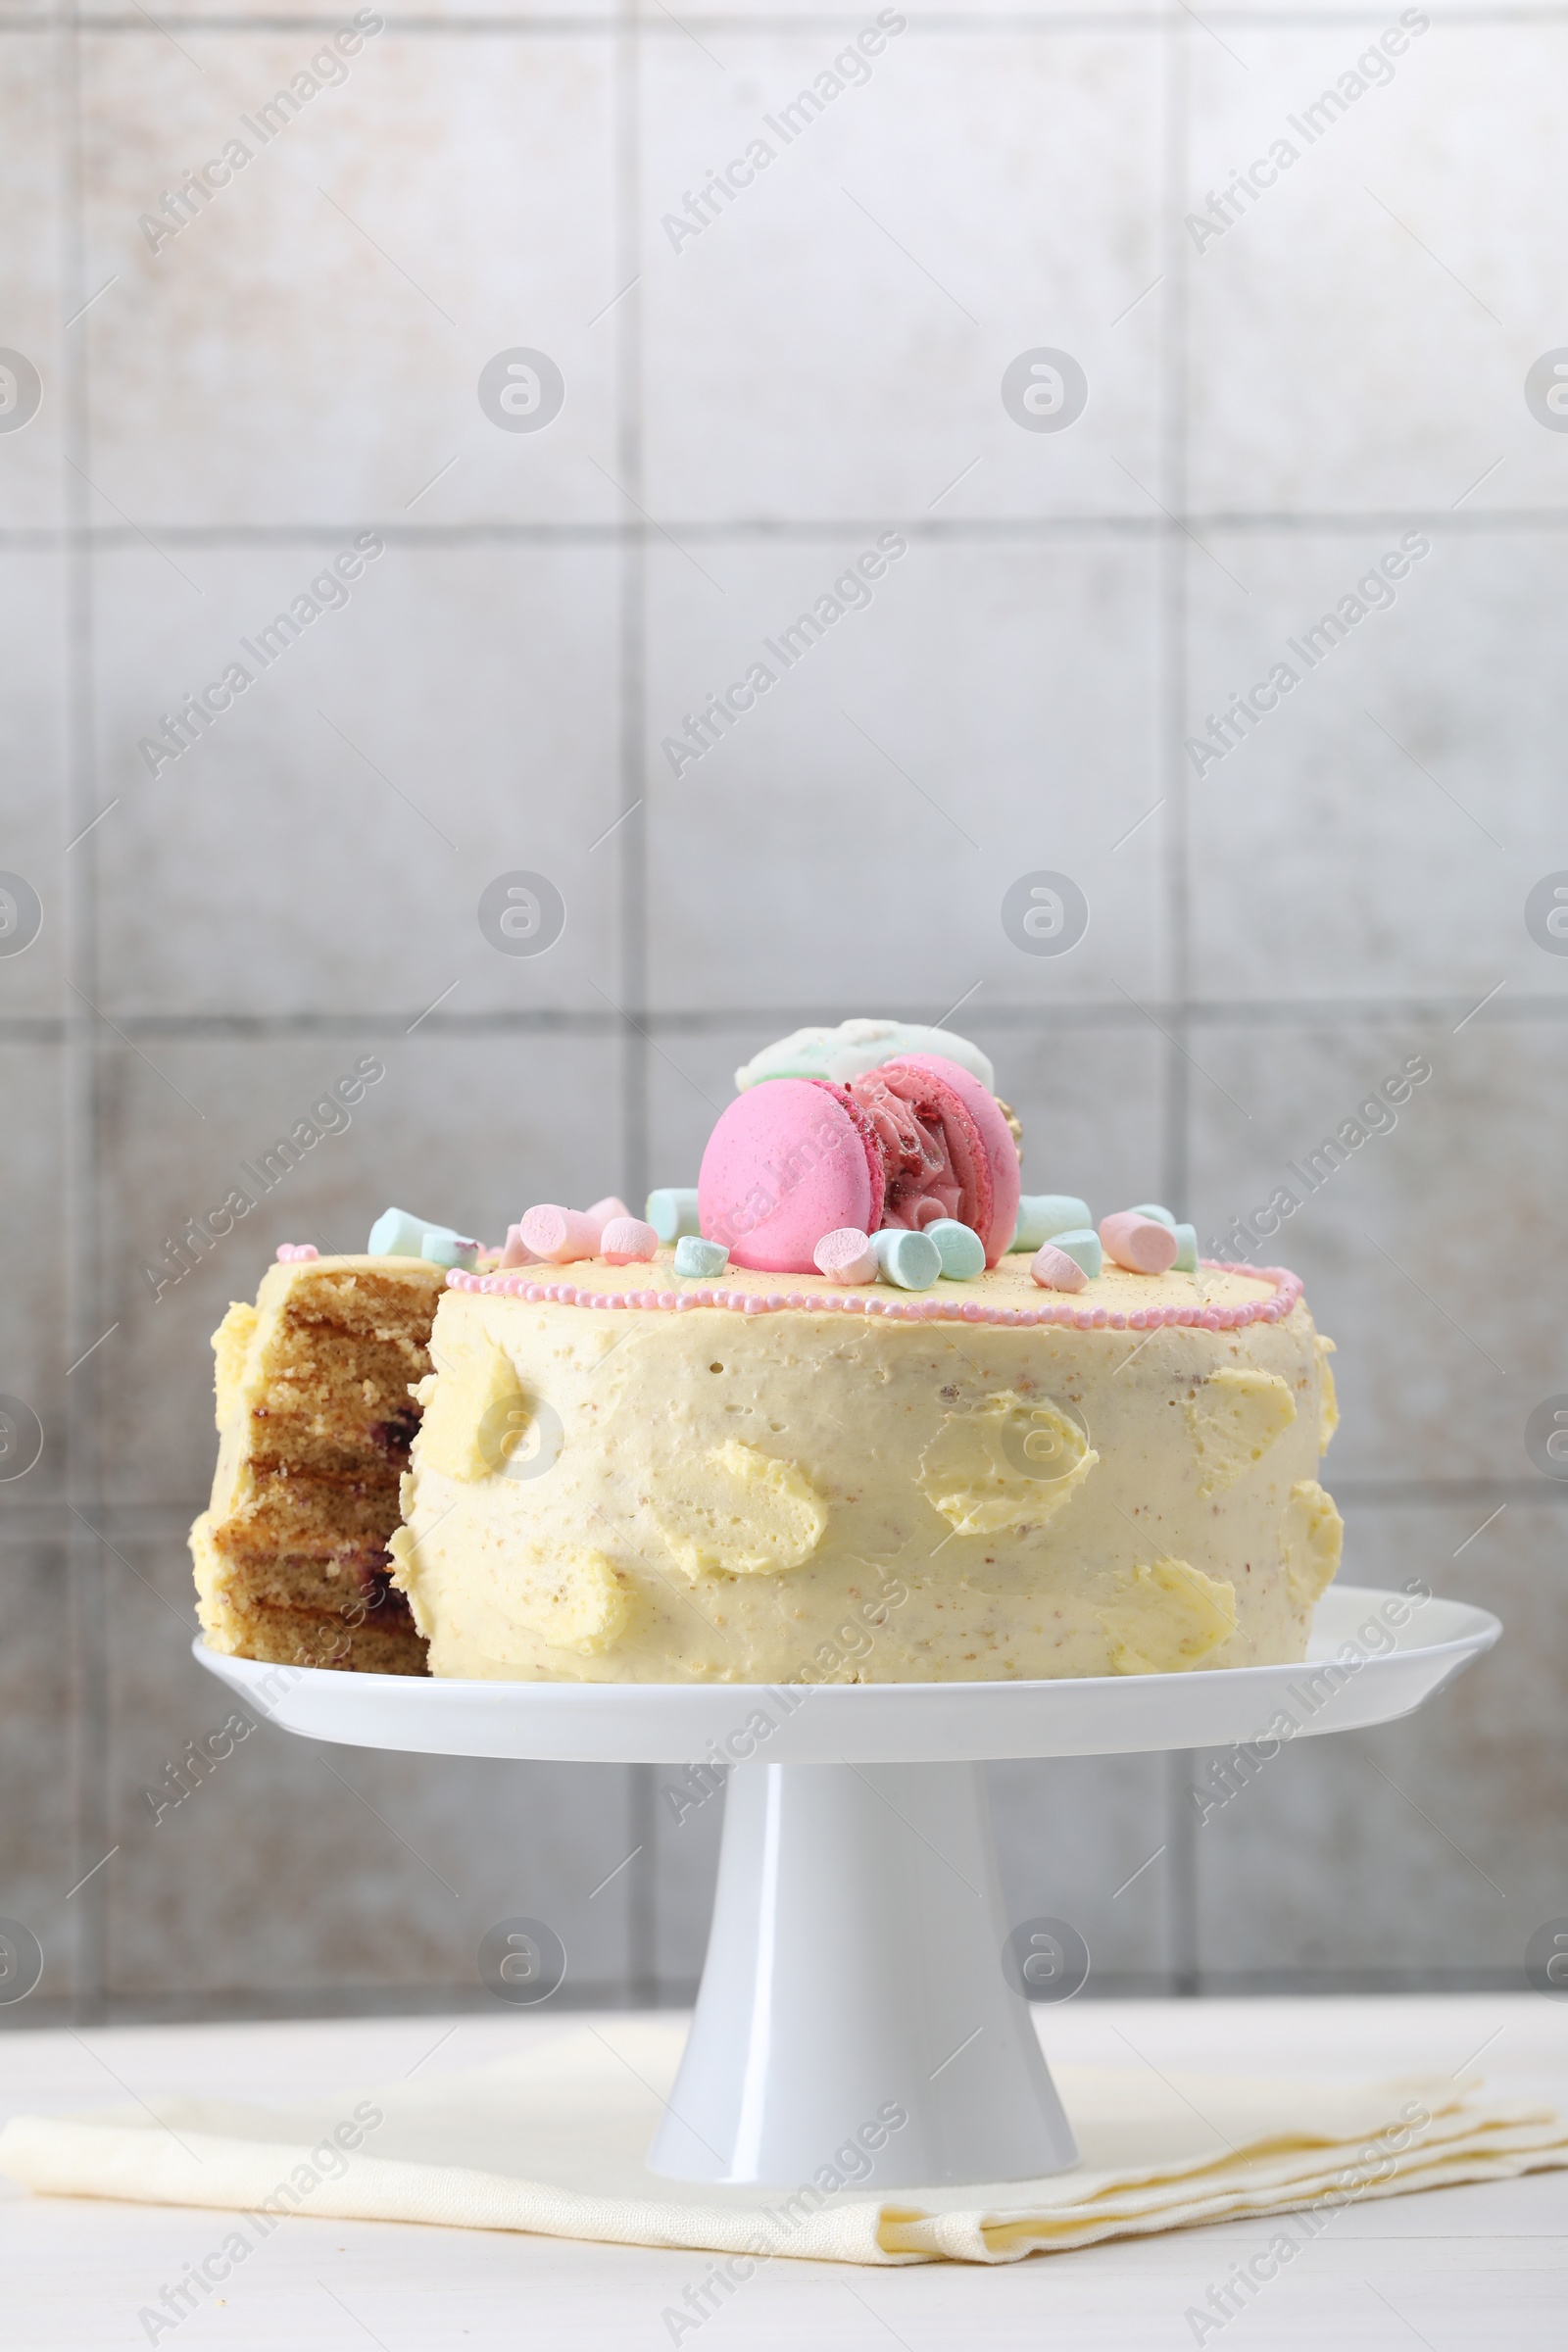 Photo of Delicious cake decorated with macarons and marshmallows on white table against tiled background, space for text